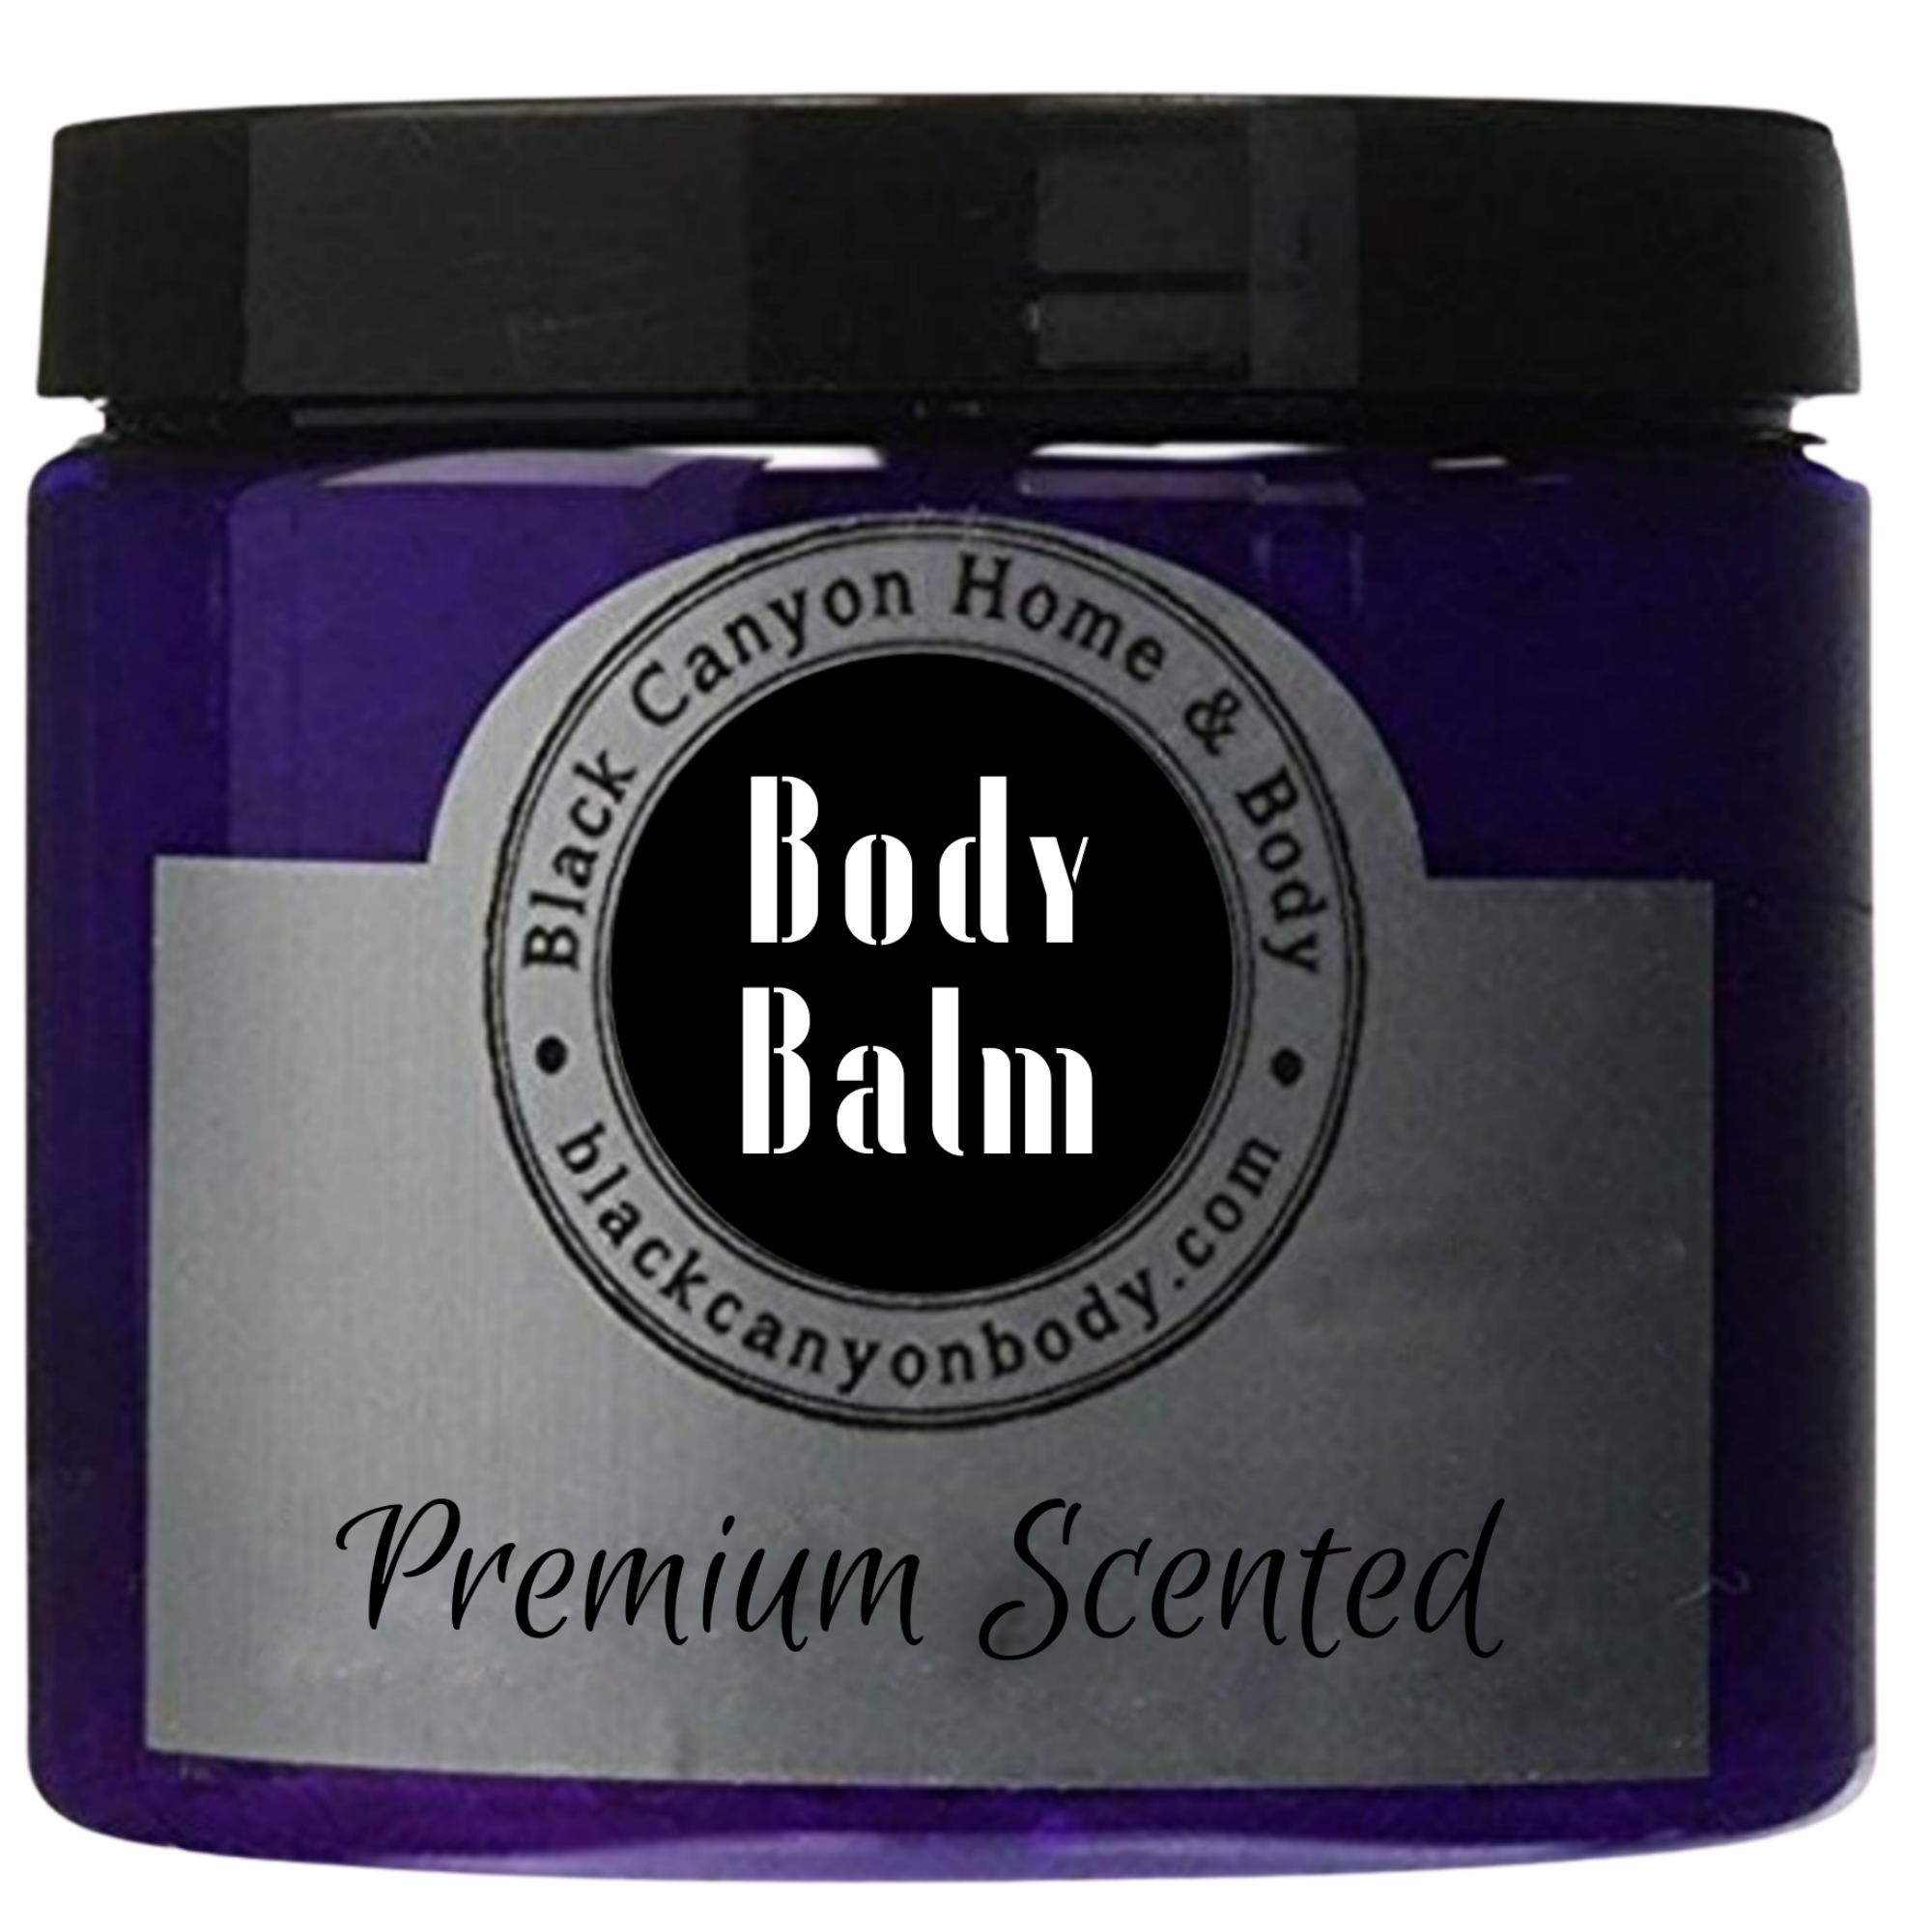 Black Canyon Citrus Berry Scented Natural Body Balm with Shea